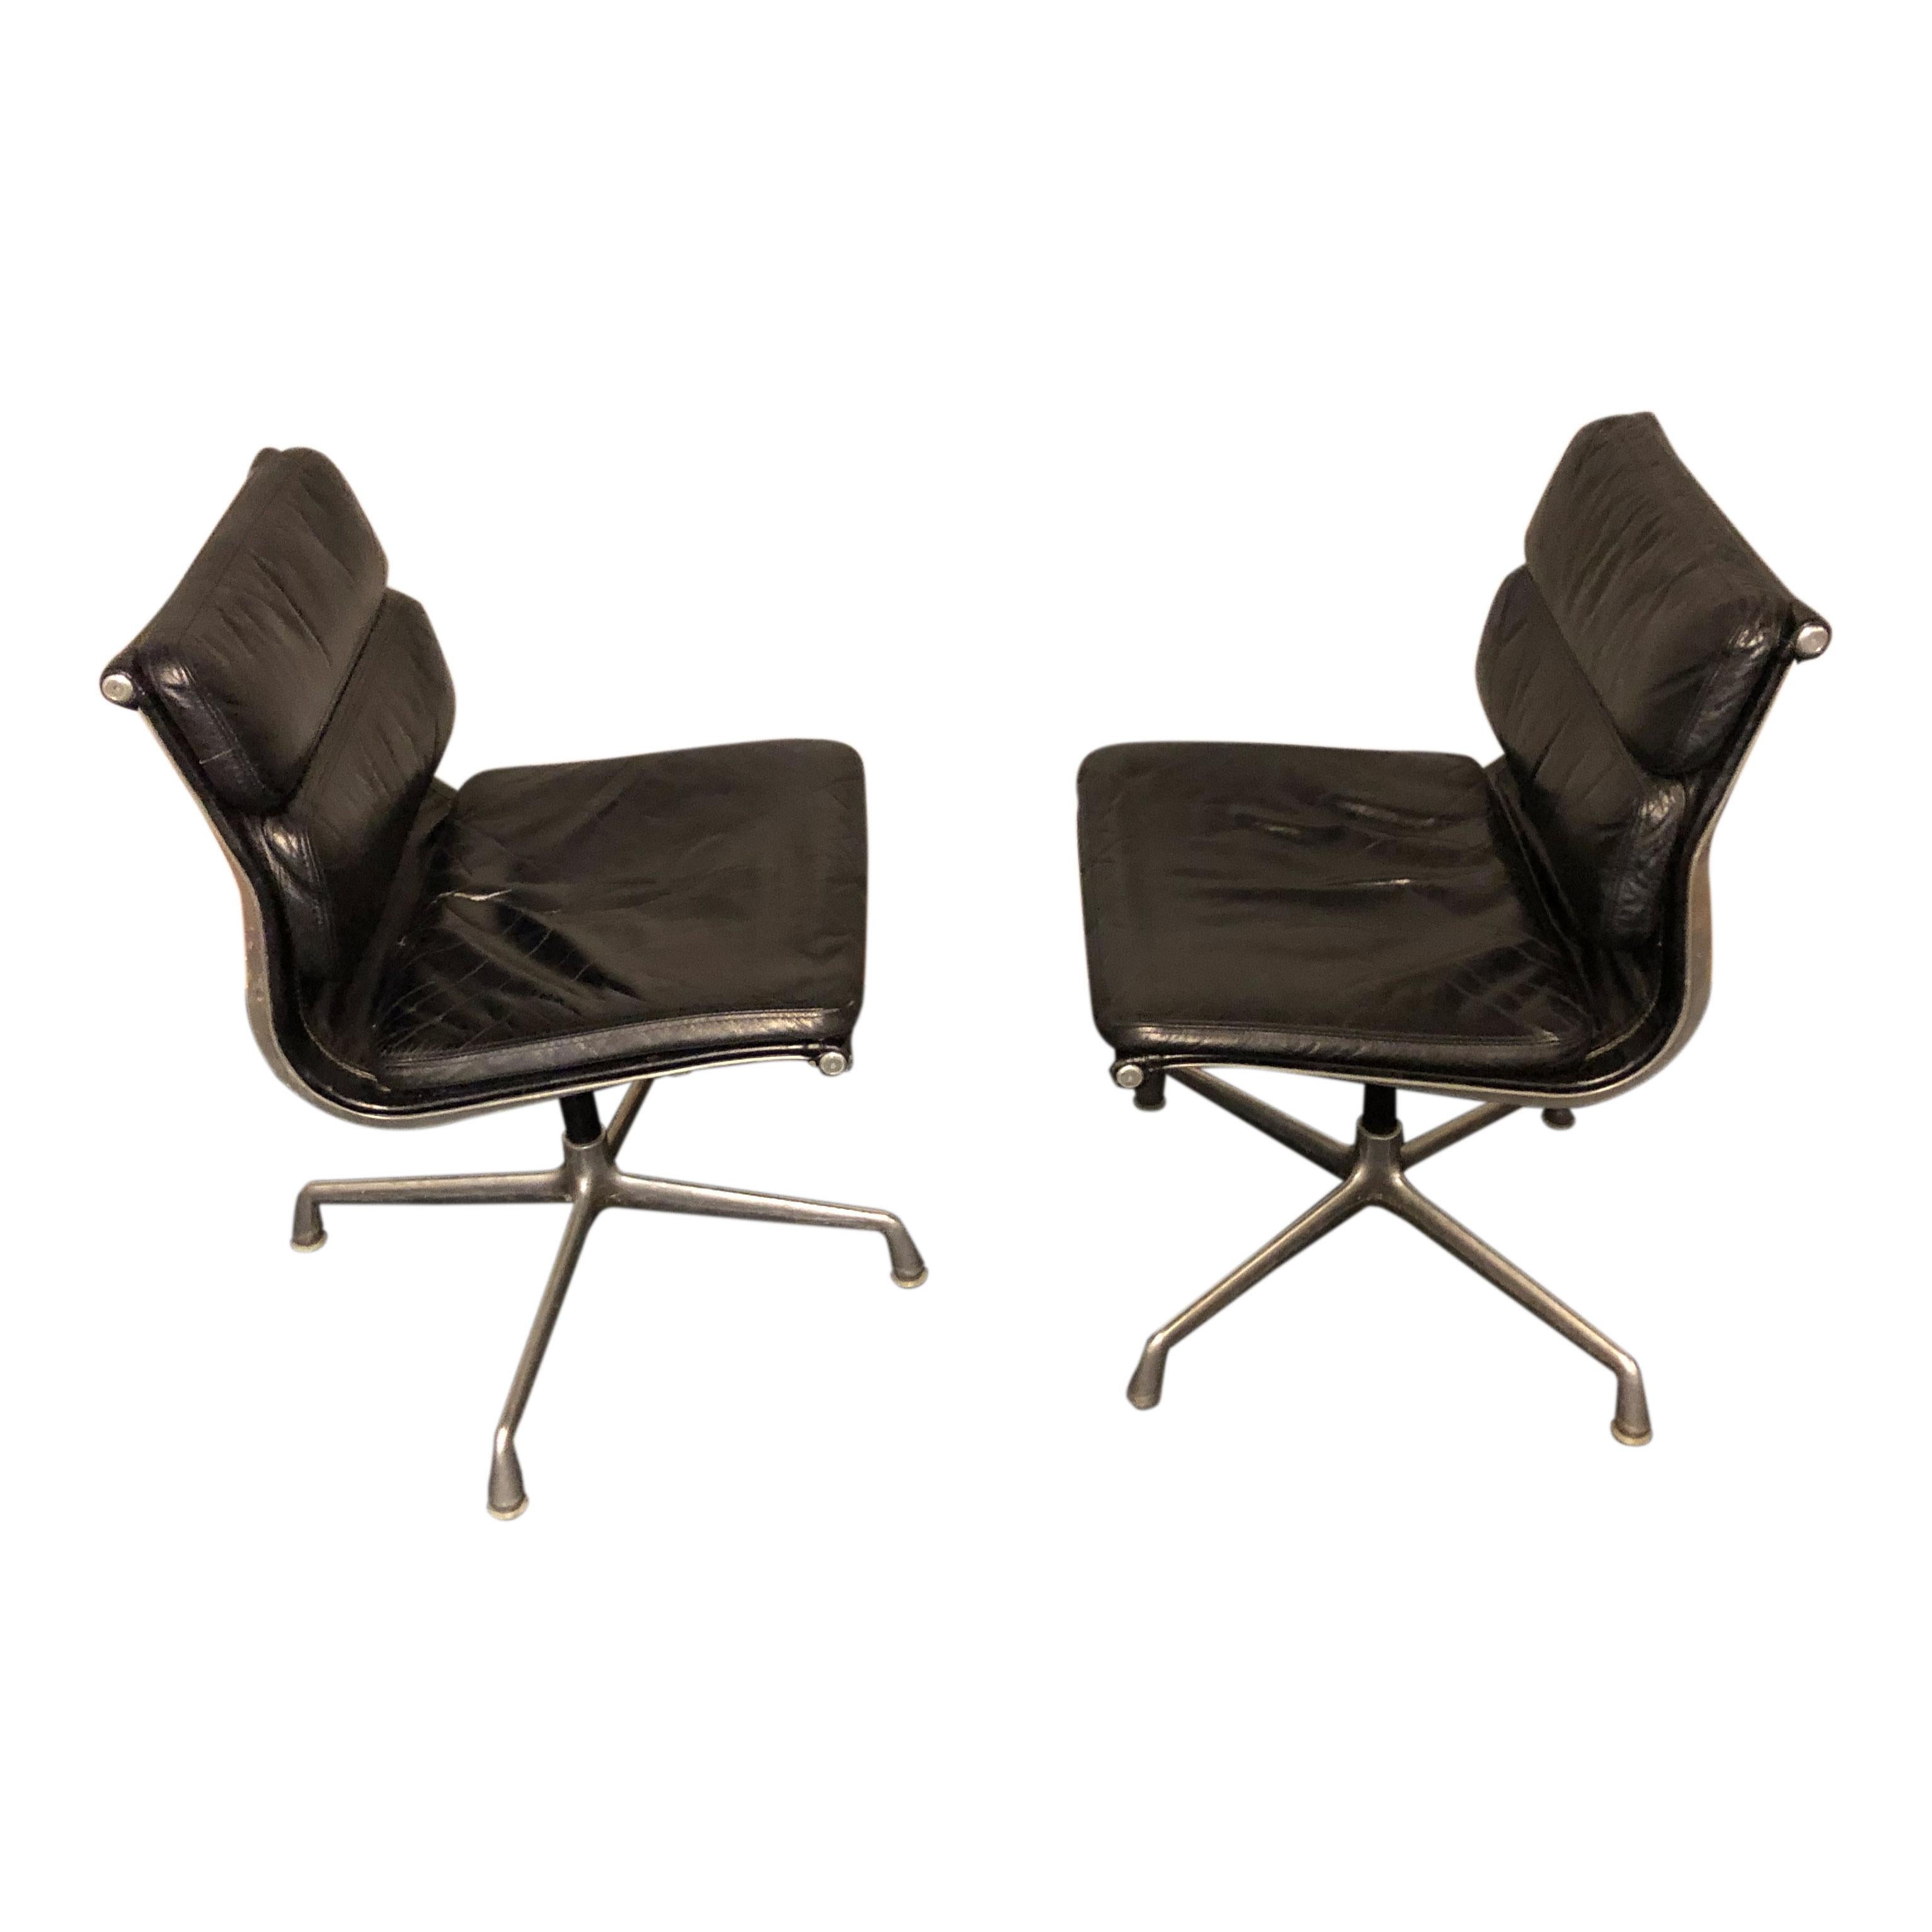 American Midcentury Soft Pad Side Chairs by Eames for Herman Miller in Black Leather